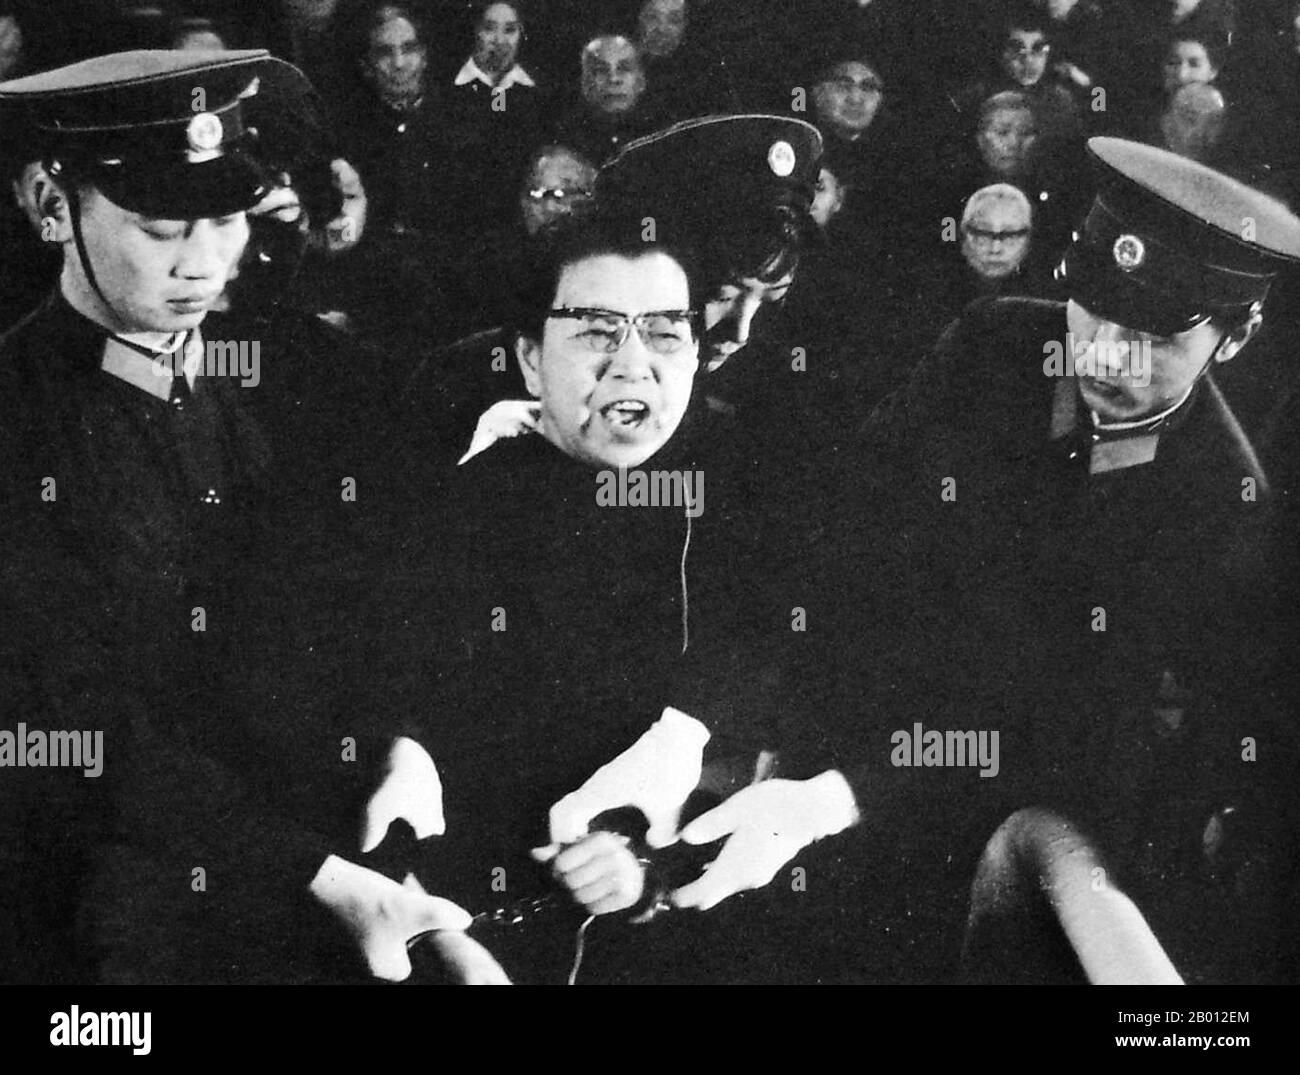 China: Jiang Qing (1914-1991), also known as Madame Mao, after her fall from power and arrest as a counter-revolutionary. She was handcuffed and defiant in court, c. 1980.  Jiang Qing (Chiang Ch'ing, March 1914  – May 14, 1991) was the pseudonym that was used by Chinese leader Mao Zedong's last wife and major Communist Party of China power figure.  She went by the stage name Lan Ping during her acting career, and was known by various other names during her life. She married Mao in Yan'an in November 1938, and is sometimes referred to as Madame Mao in Western literature, serving as first lady. Stock Photo